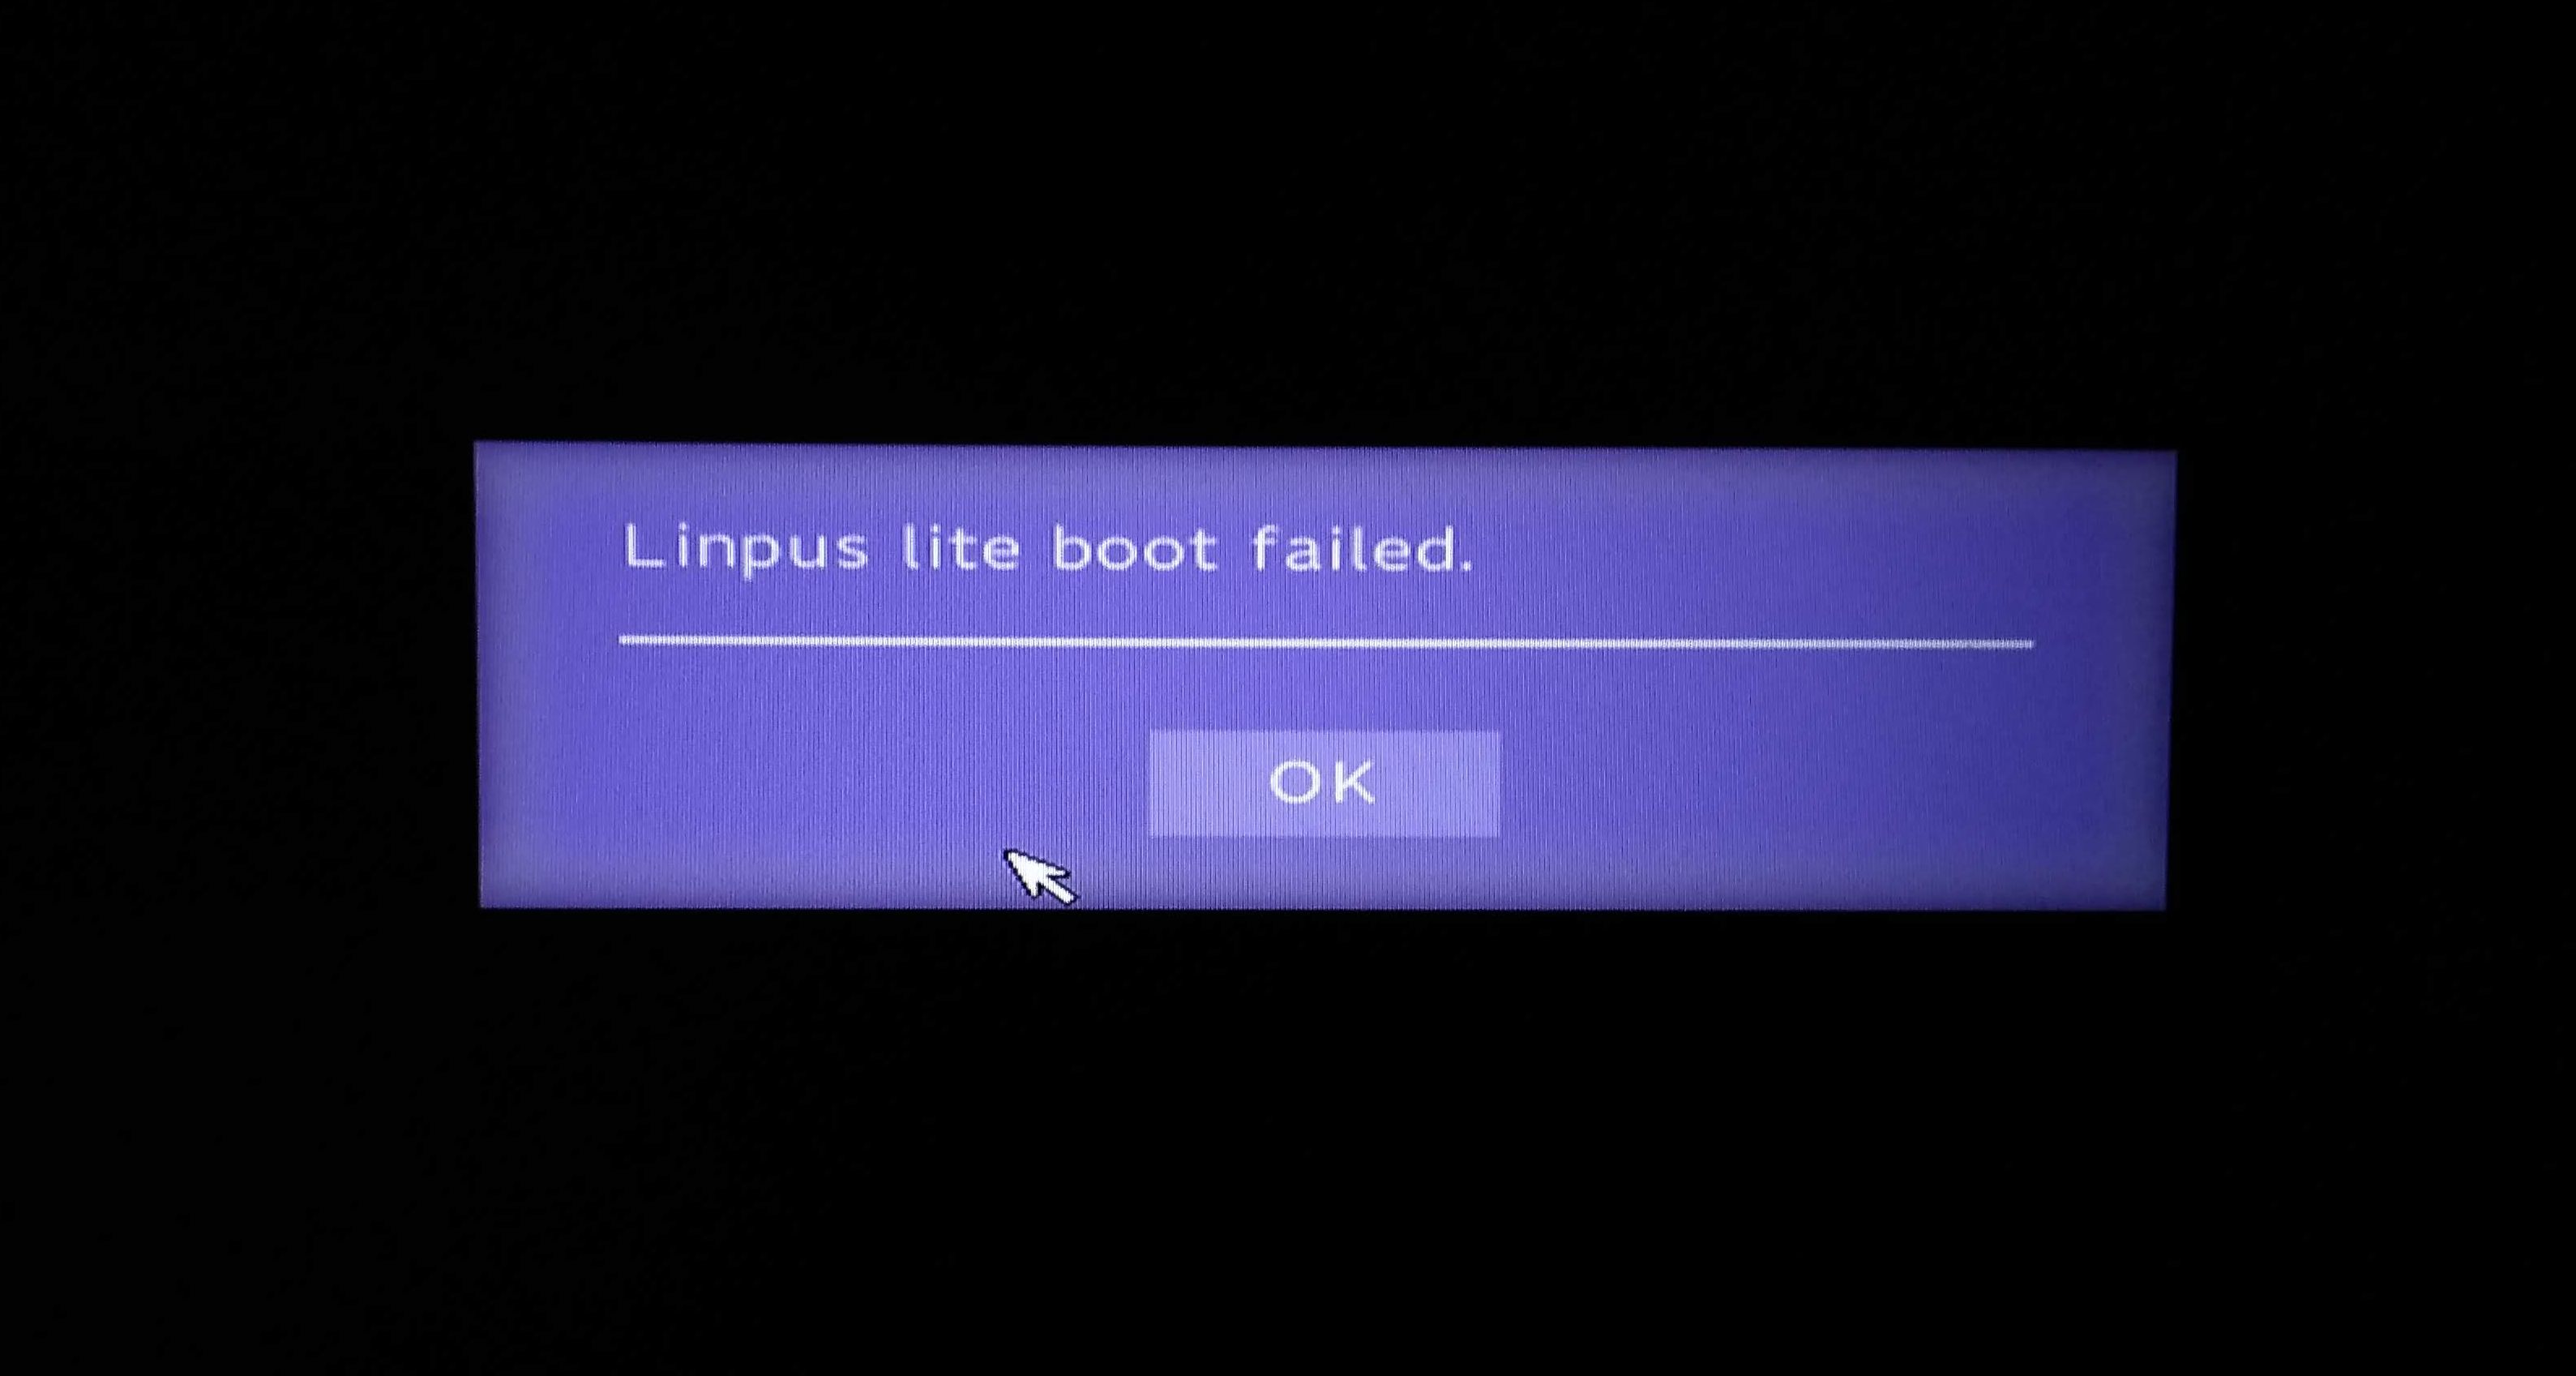 MediCat USB - A Multiboot Linux USB for PC Repair | Page 112 | GBAtemp.net  - The Independent Video Game Community